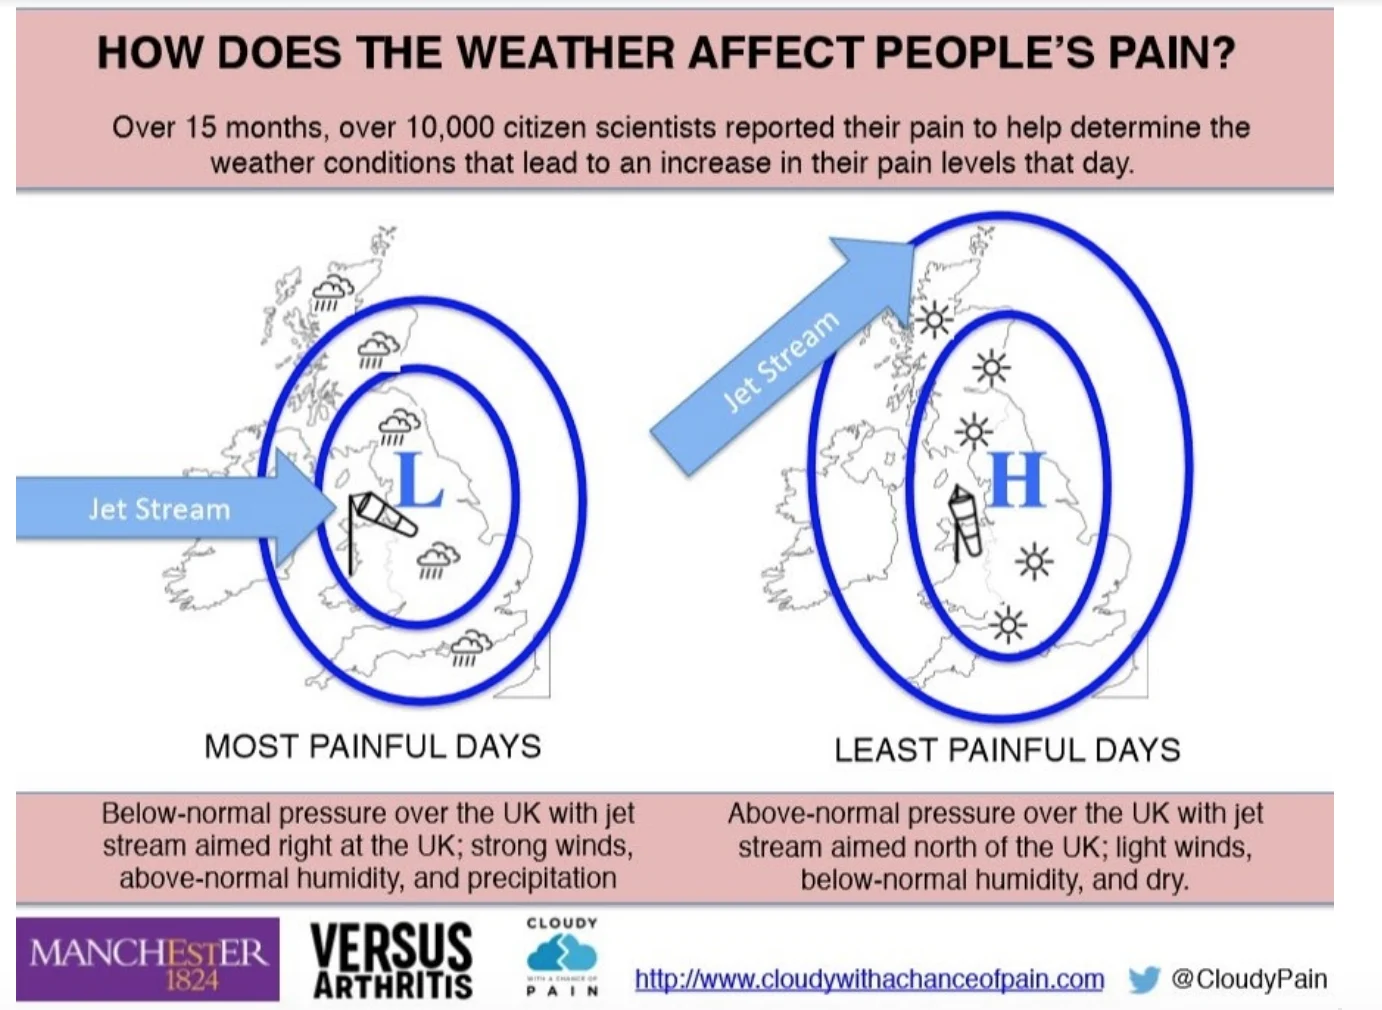 Credit: University of Manchester, Cloudy With a Chance of Pain 2